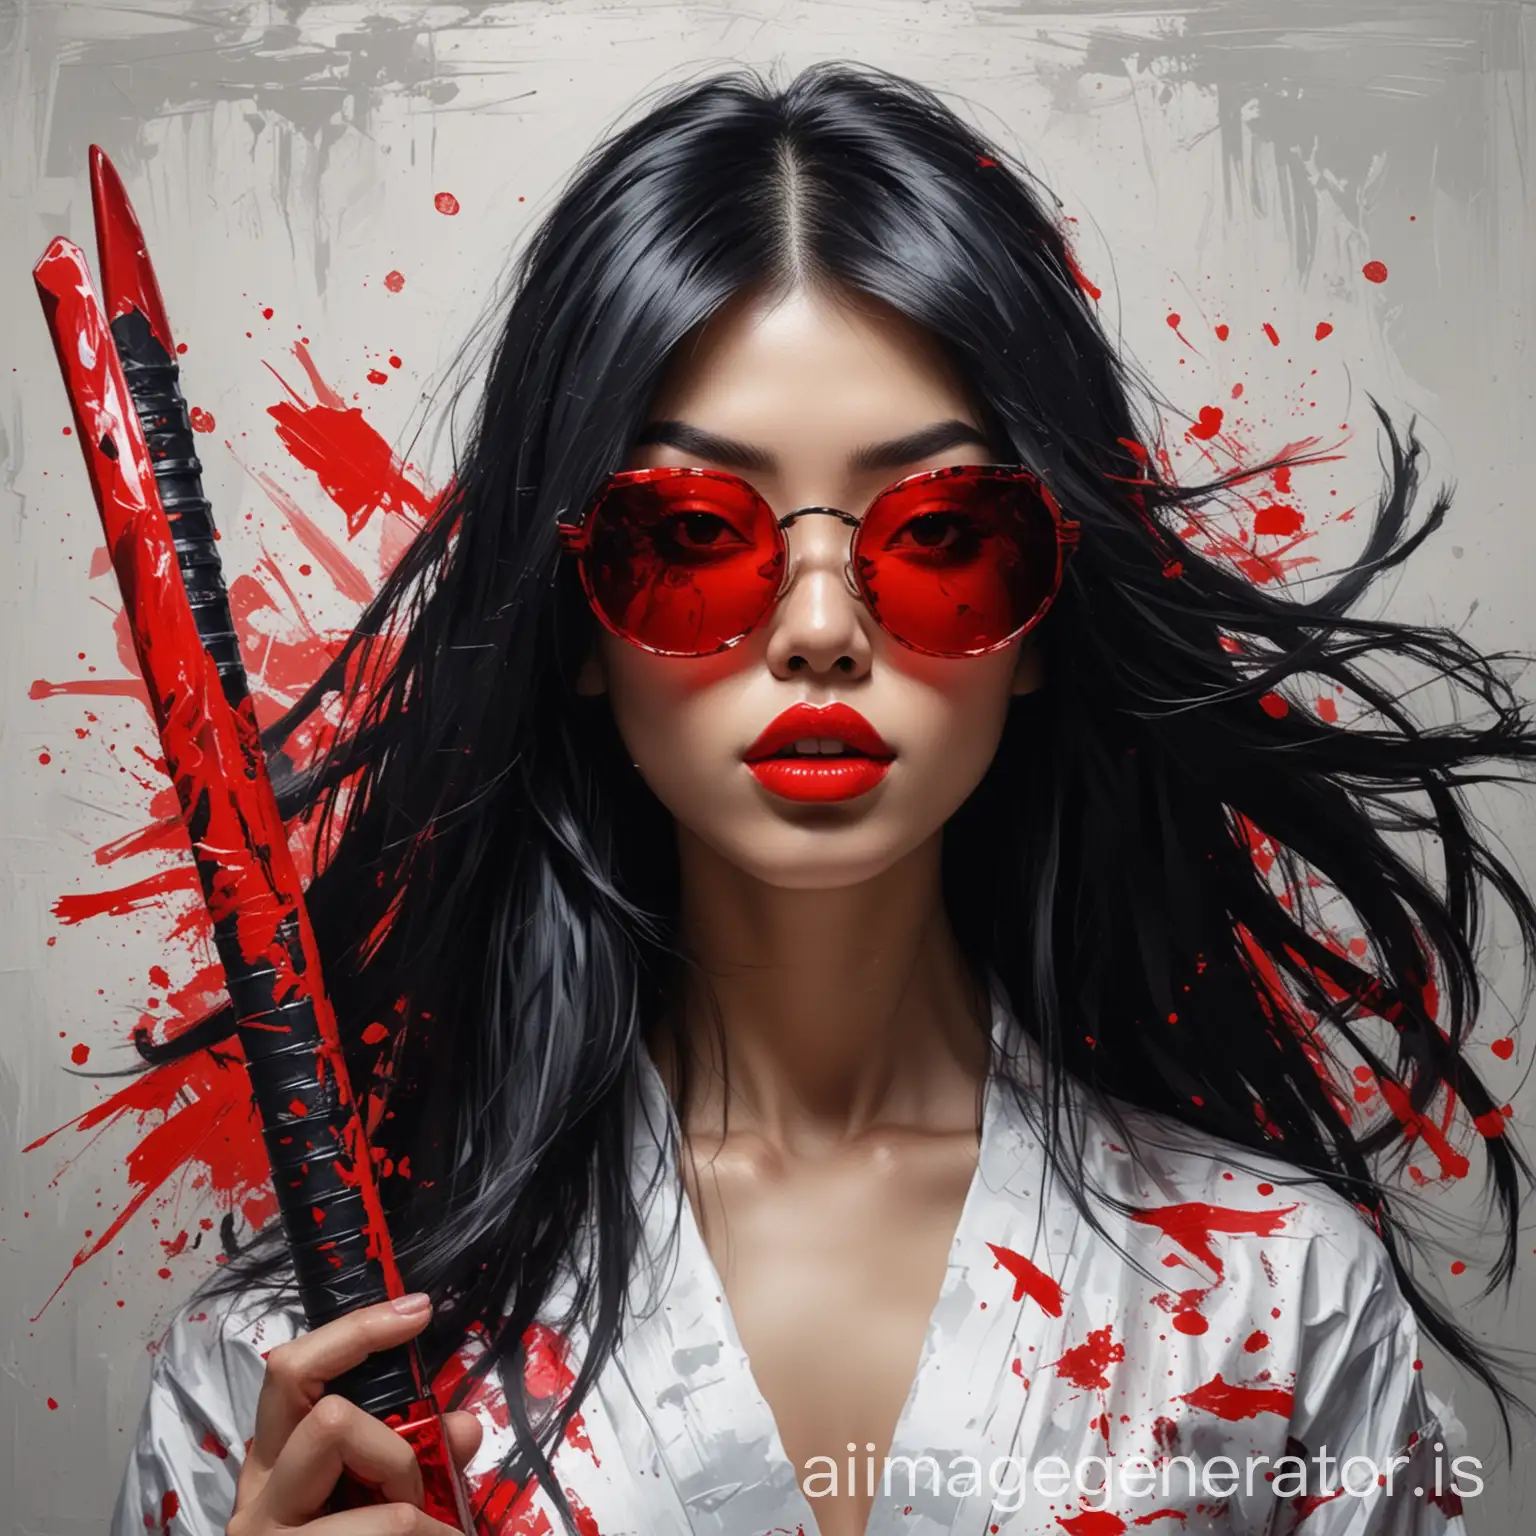 Abstract-Art-Girl-with-Long-Black-Hair-Red-Sunglasses-and-Samurai-Sword